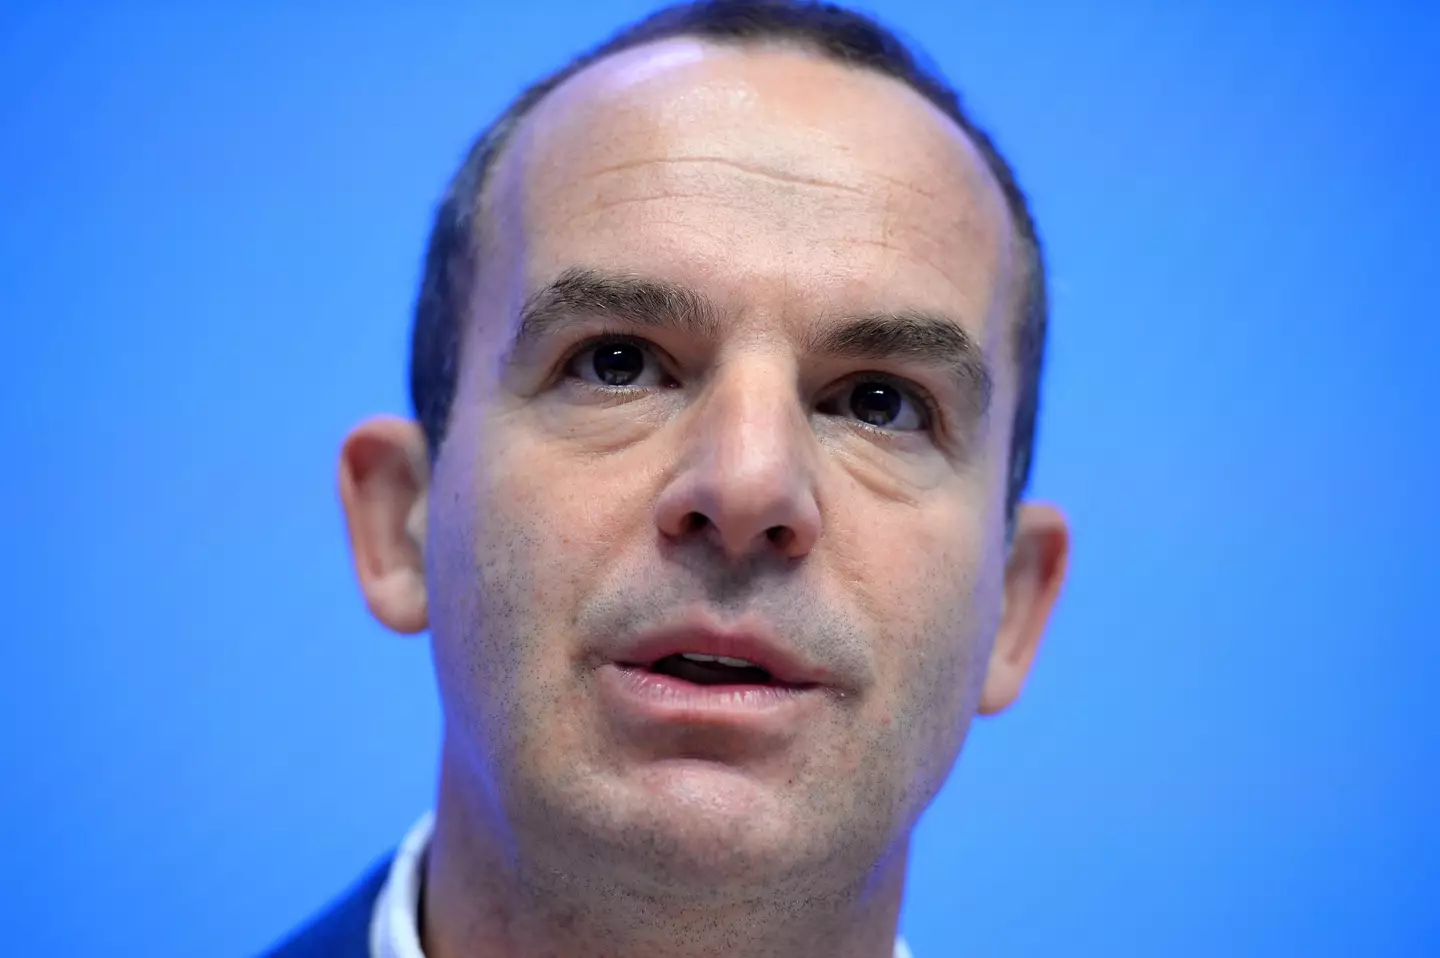 A clip of Martin Lewis 'kicking off' on his TV show was shared to TikTok.